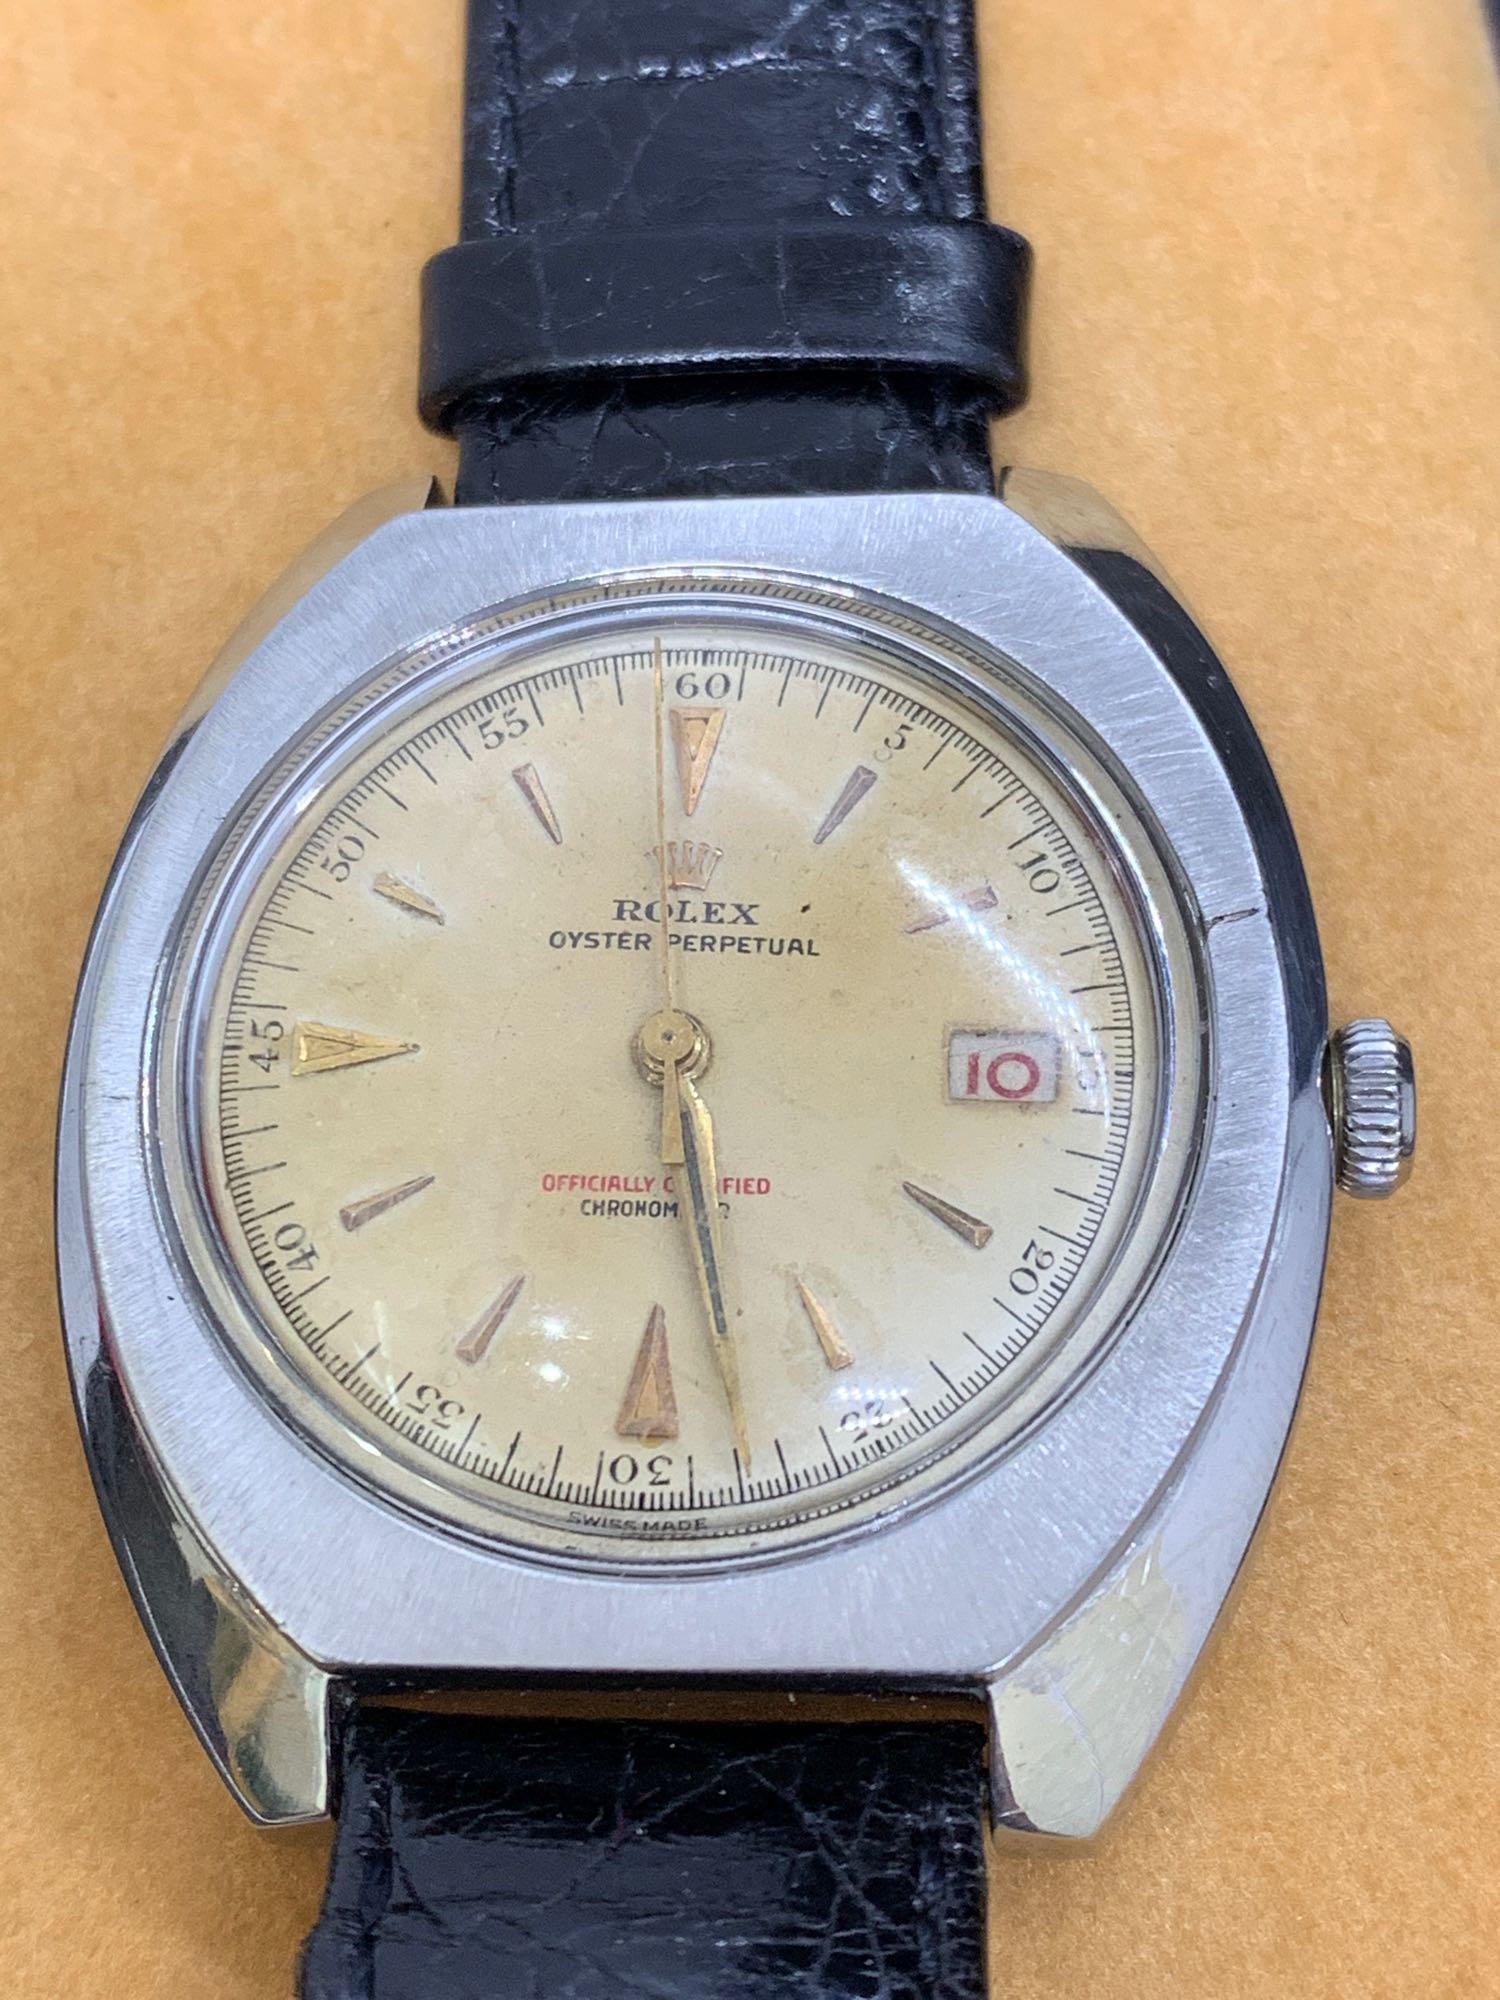 Vintage 40mm S/Steel Watch Marked Rolex - Movement checked and verified as Rolex, Automatic